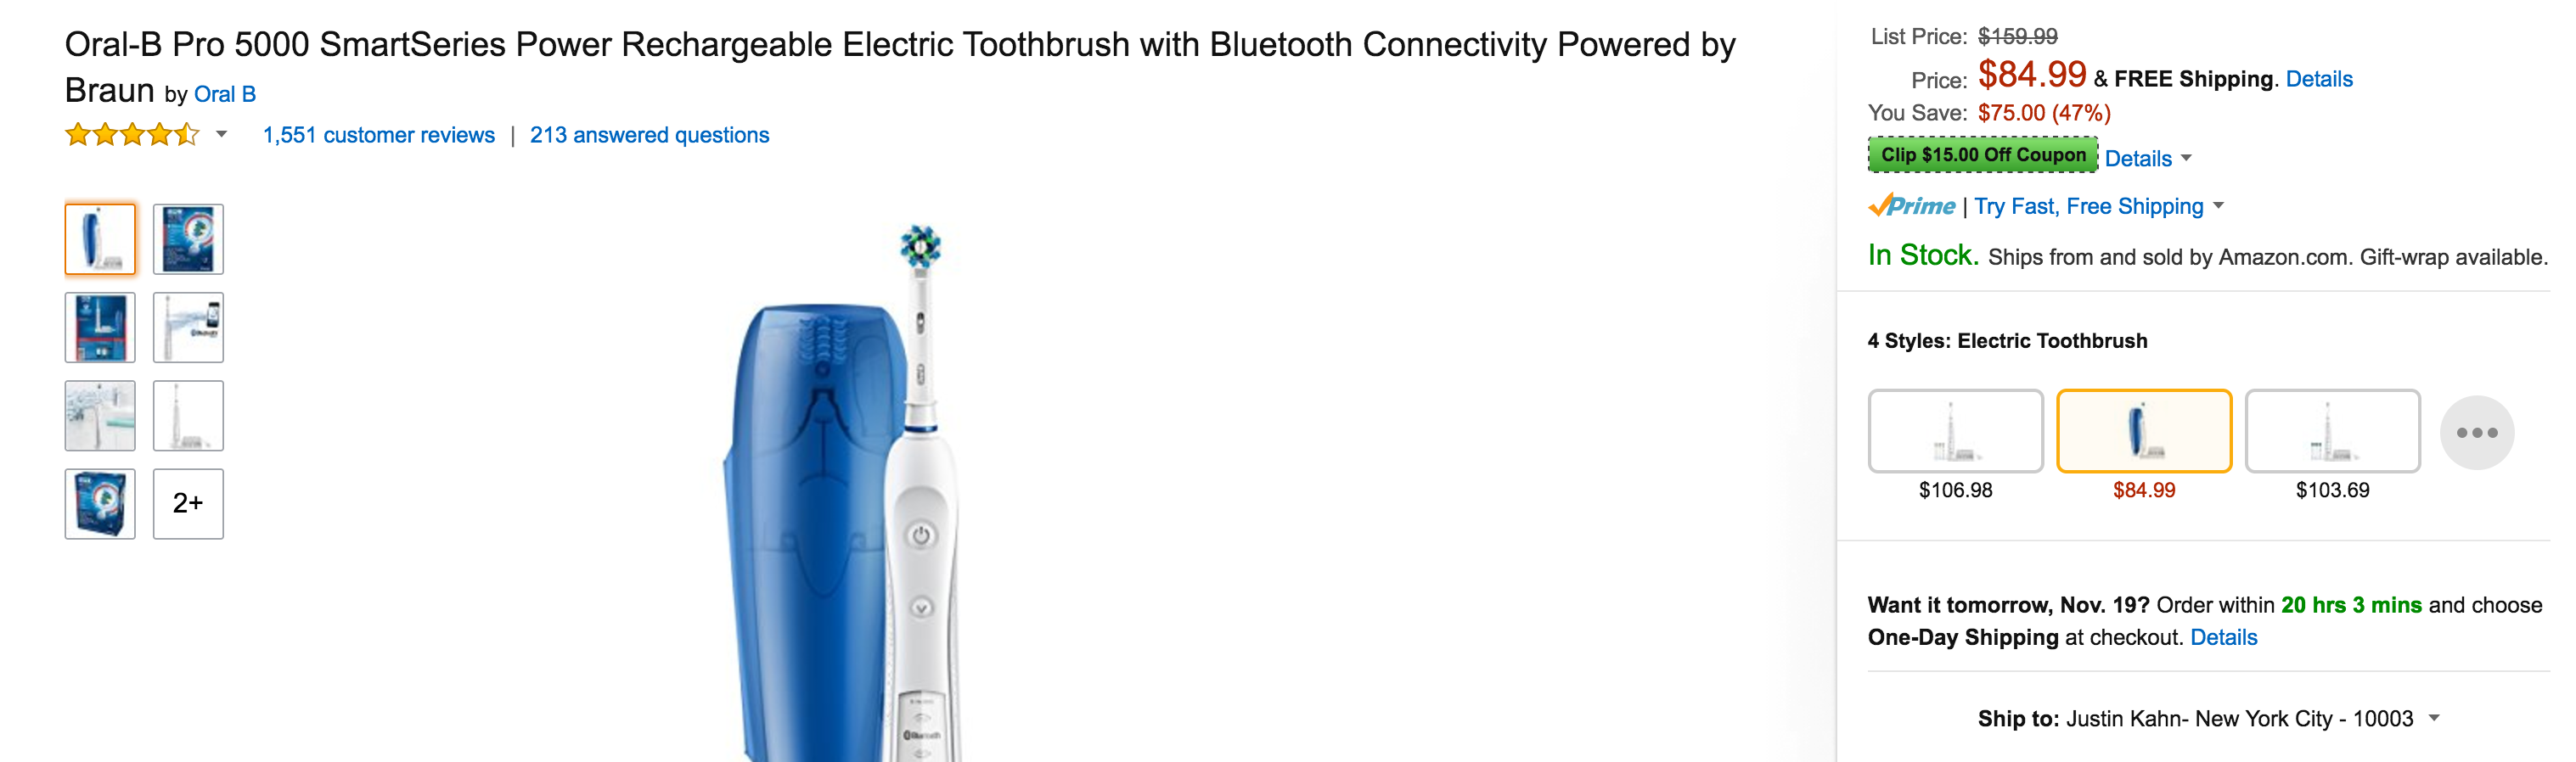 oral-b-pro-5000-smartseries-power-rechargeable-electric-toothbrush-with-bluetooth-connectivity